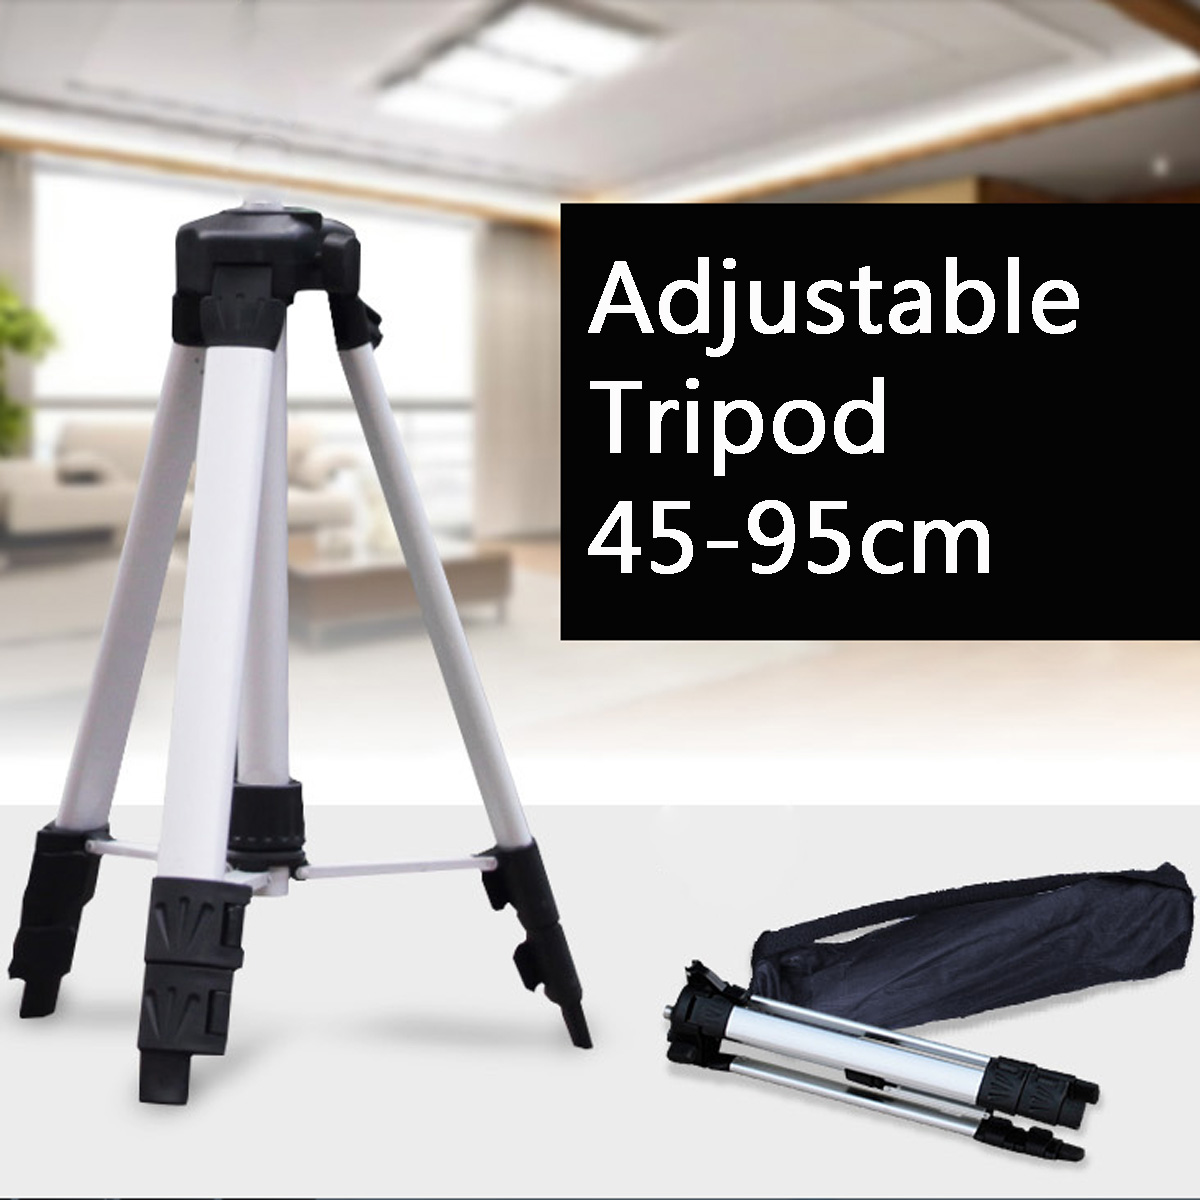 Professional-Tripod-Adjustable-for-Rotary-Laser-Leveling-Measuring-Tool-Instruments-Line-Level-Exten-1616473-1